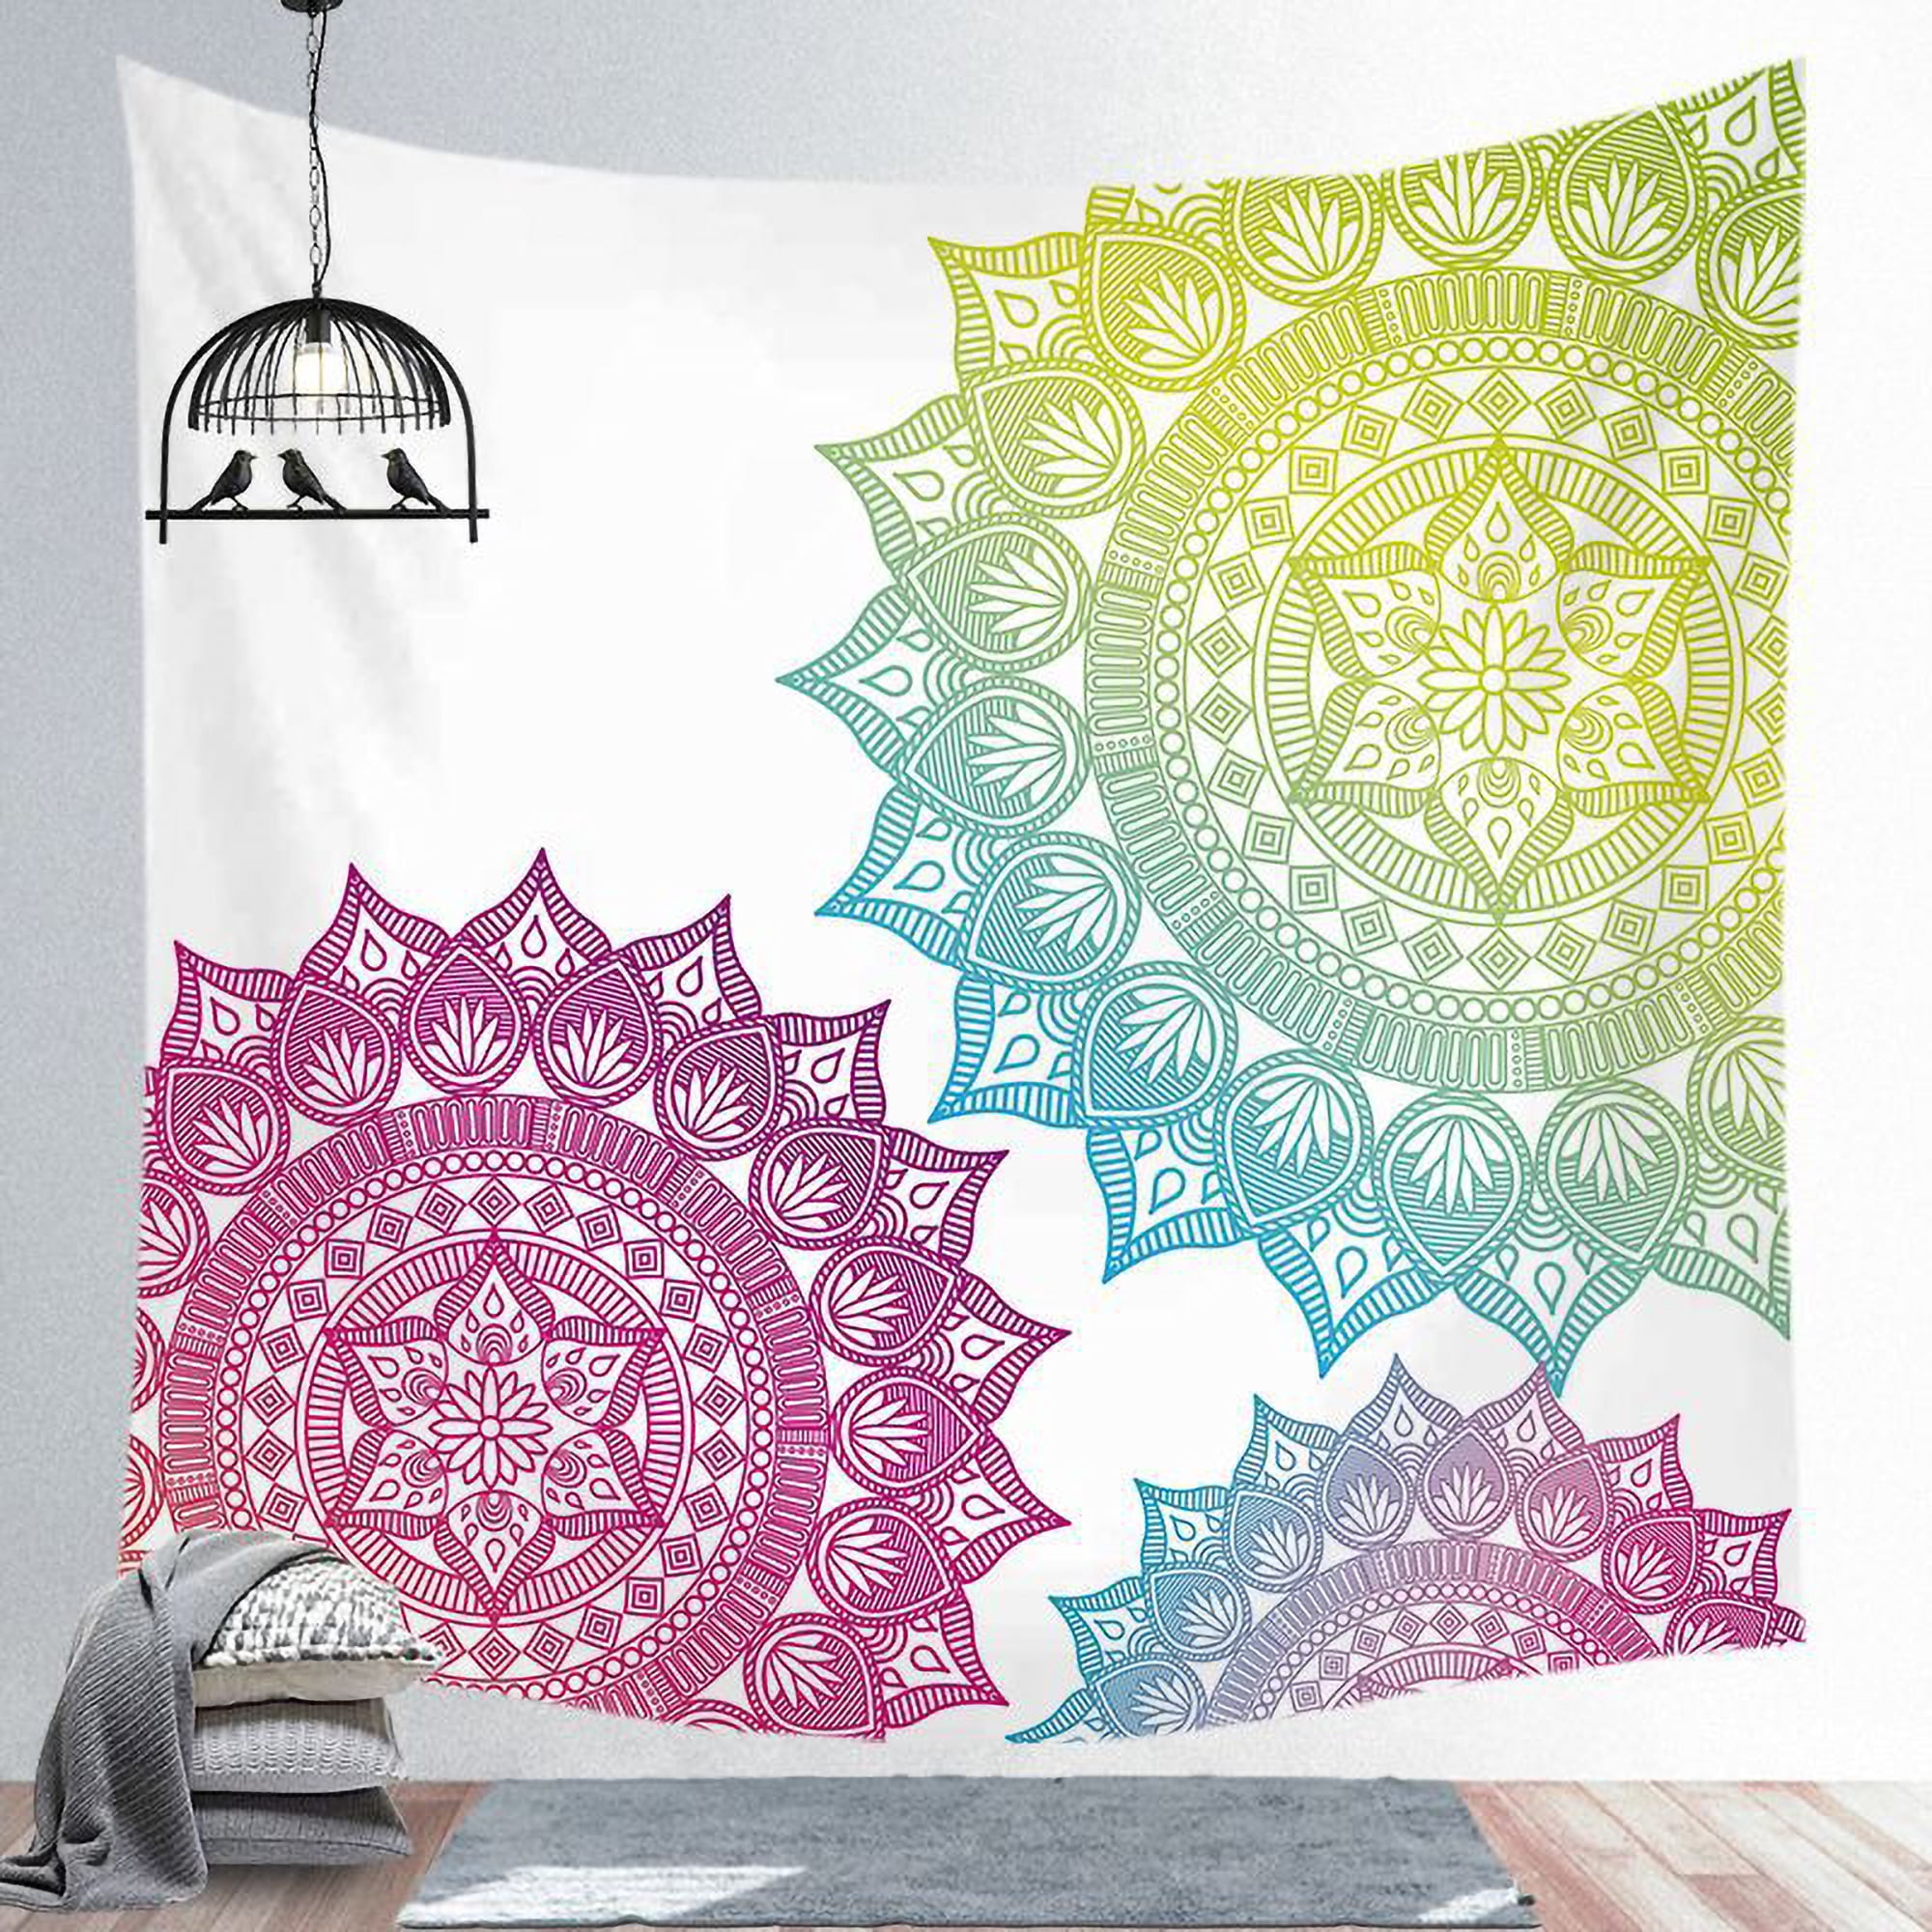 Indie Hippie Wall Spiritual Tapestry - Boho Peacock Mandala Bedroom Art  Hanging Home Decor Aesthetic For Dorm Tablecloth,Sofa  Cover,Bedspread,Curtain